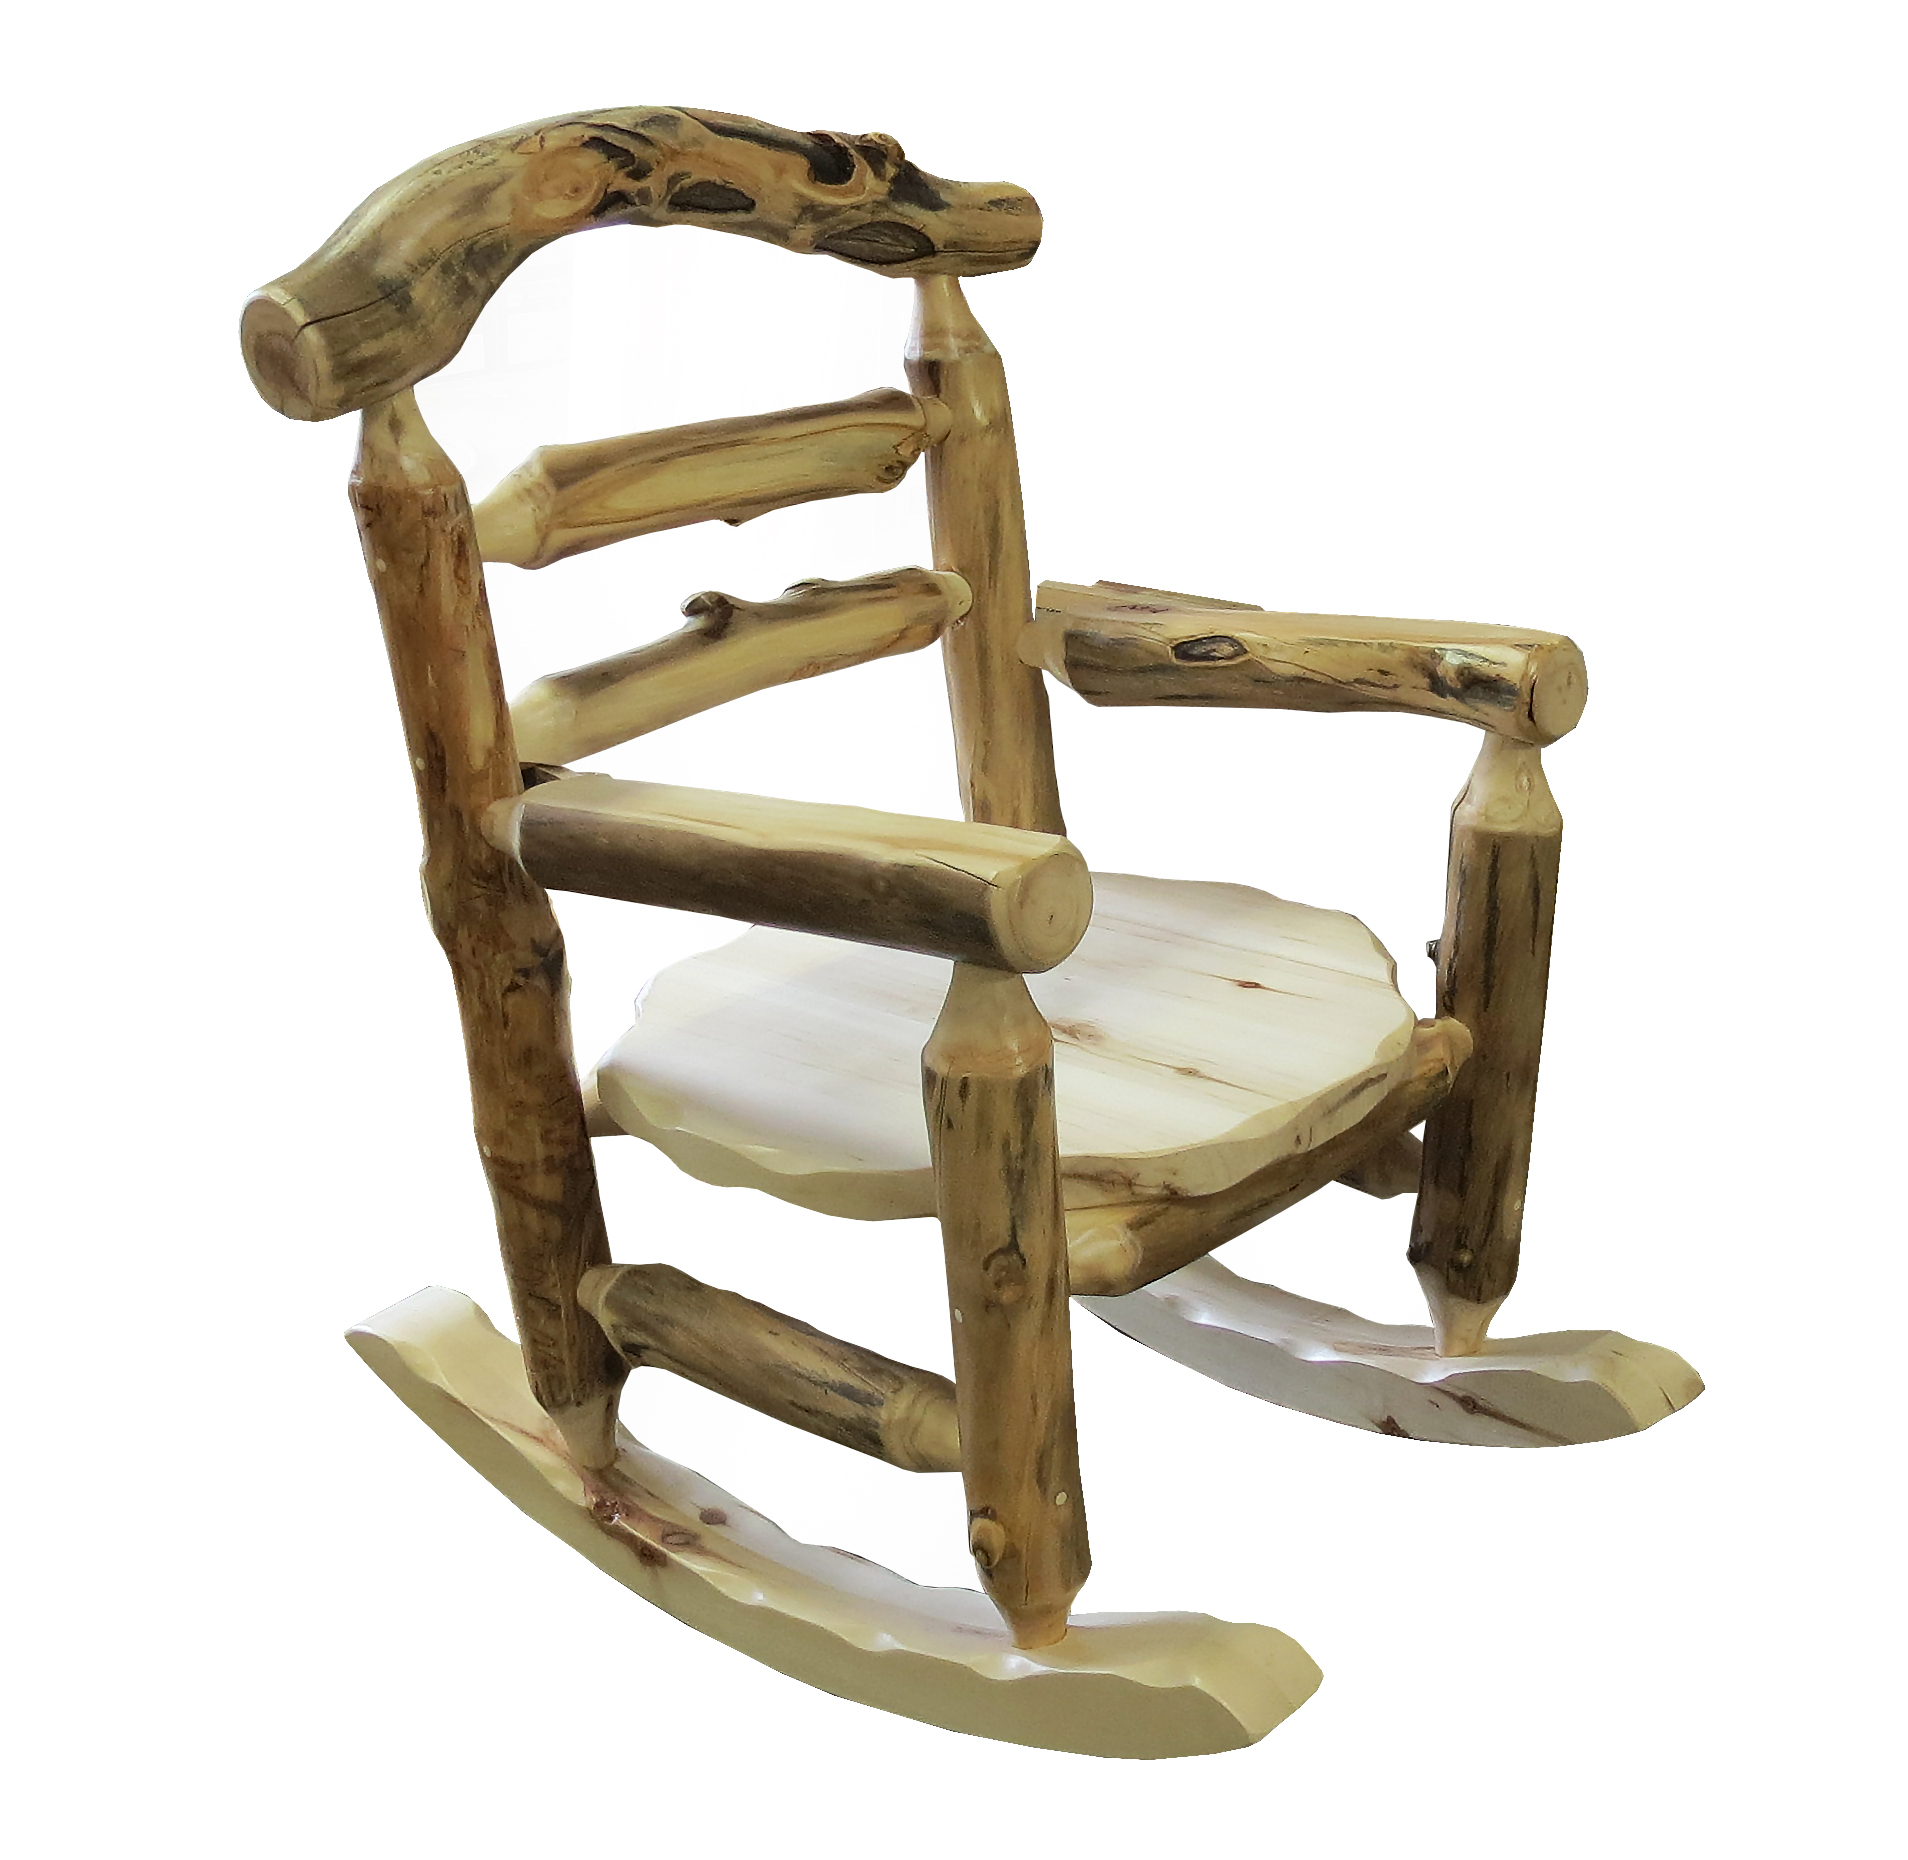 Aspen Grizzly Rocking Chair